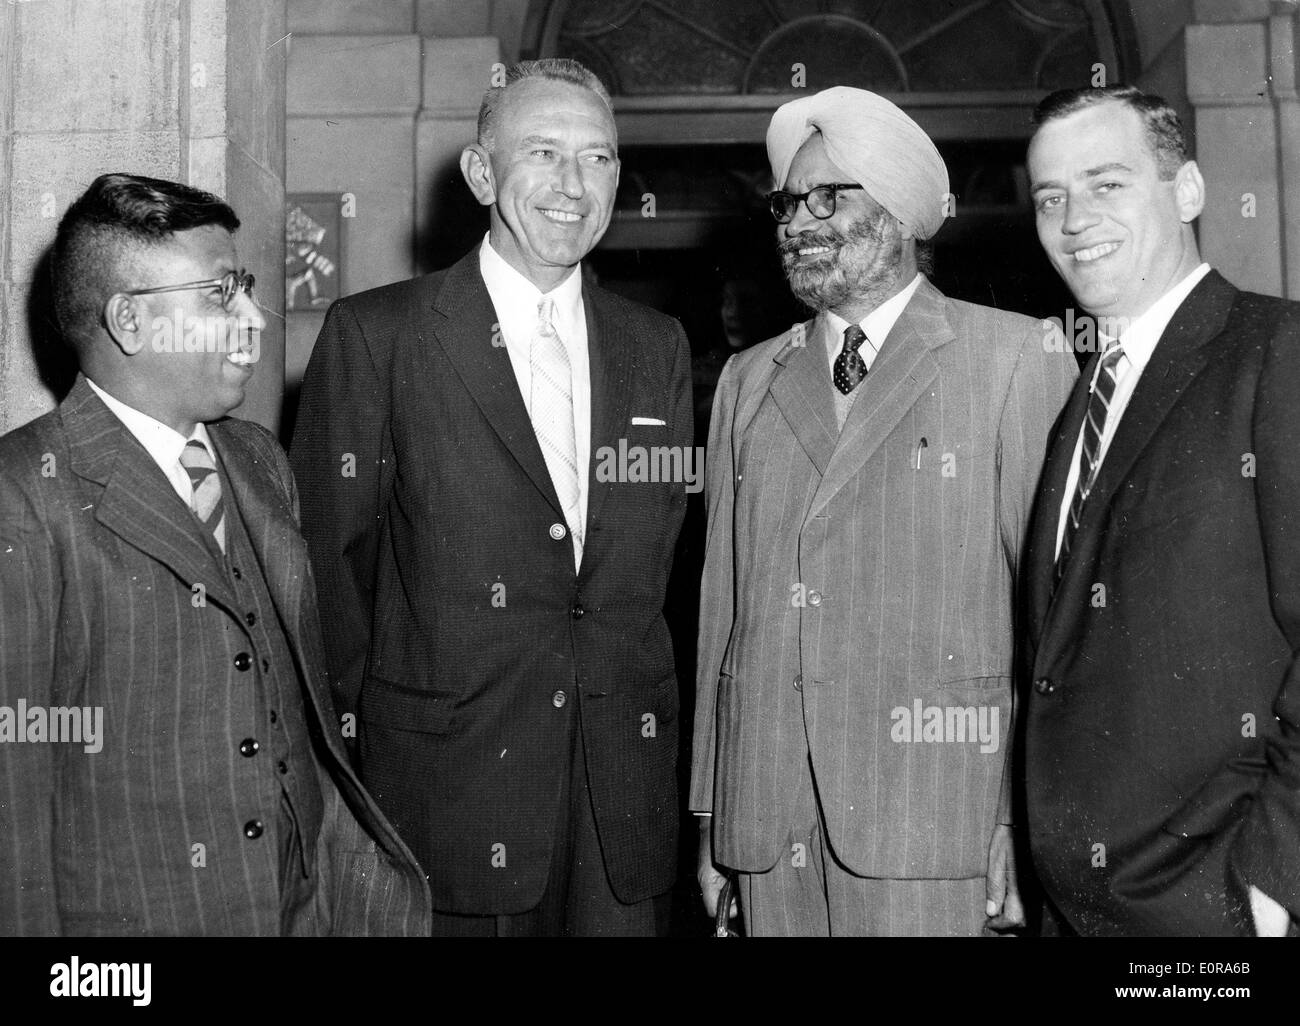 Sep 15, 1958; London, UK; Delegates of India, S.M.DUTT(India), V.E. BAUGHMAN (USA), G. SINGH (New Delhi), and MYLES J. AMBROSE (USA) at the Interpol Conference. Stock Photo